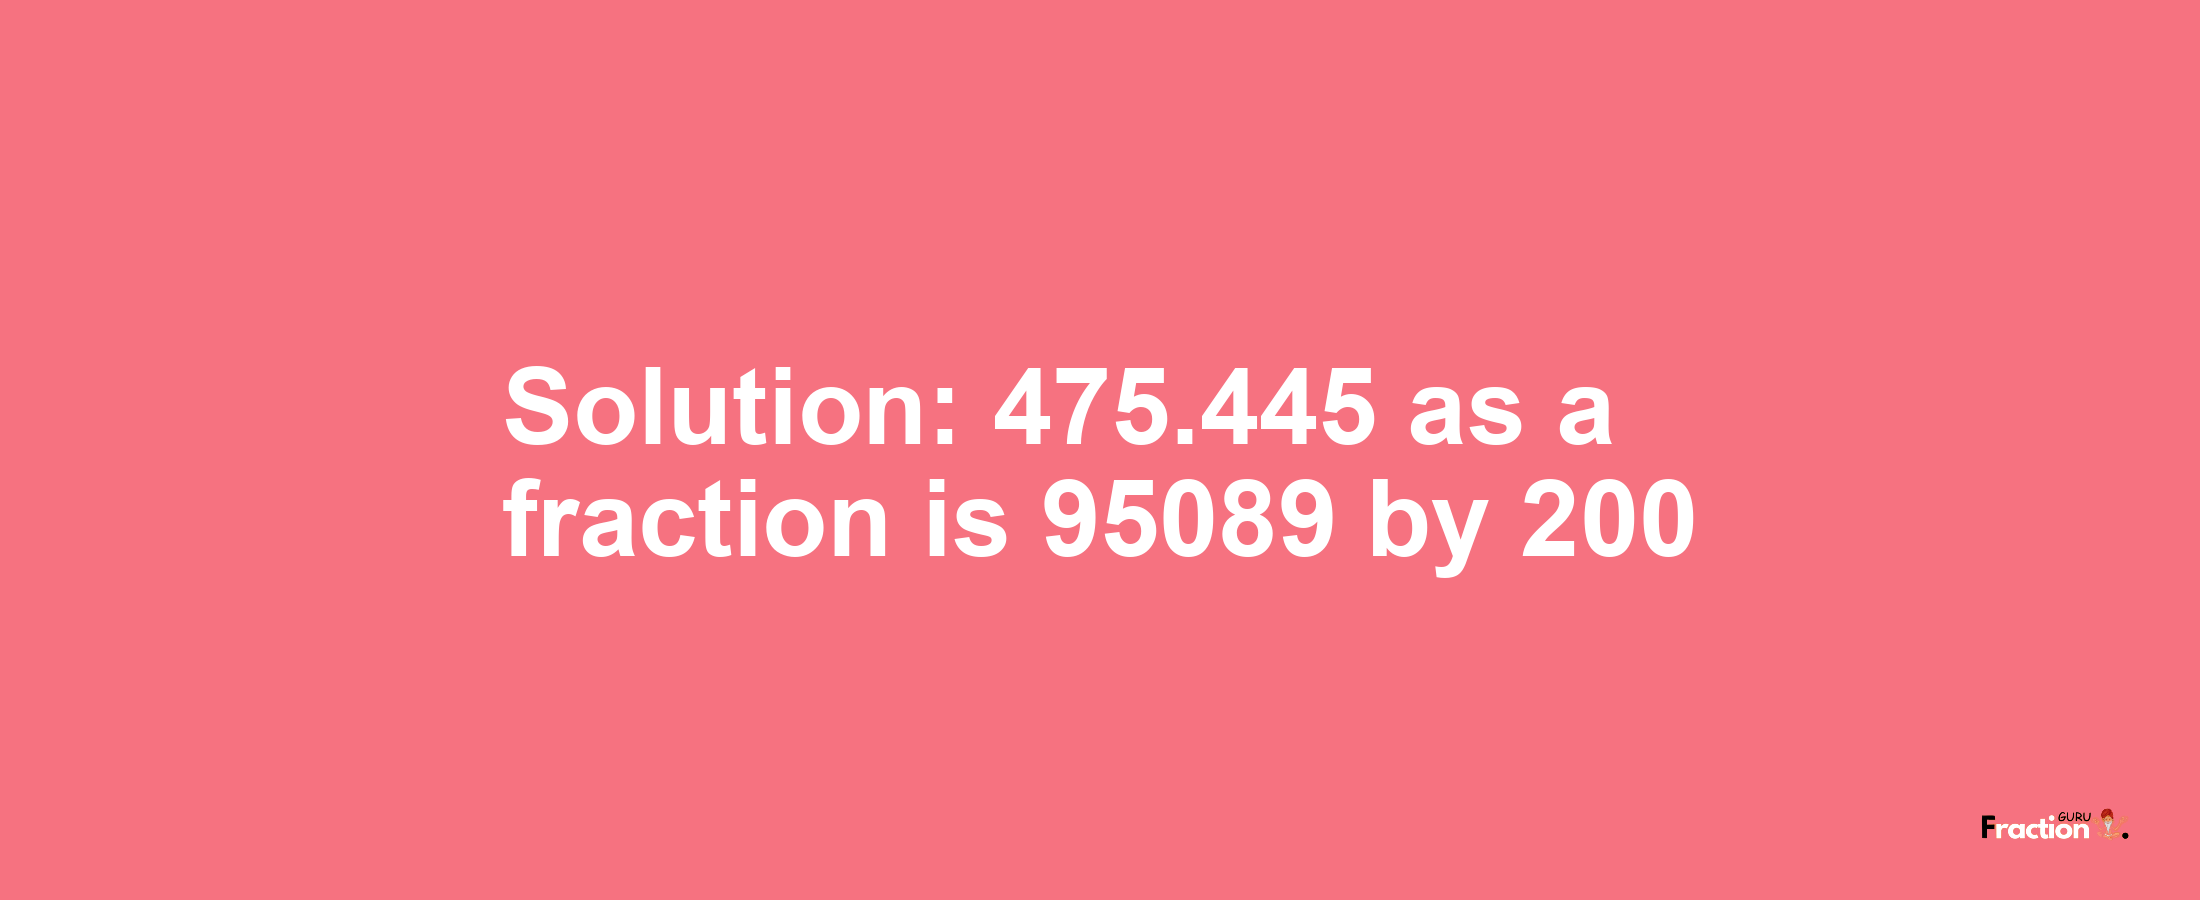 Solution:475.445 as a fraction is 95089/200